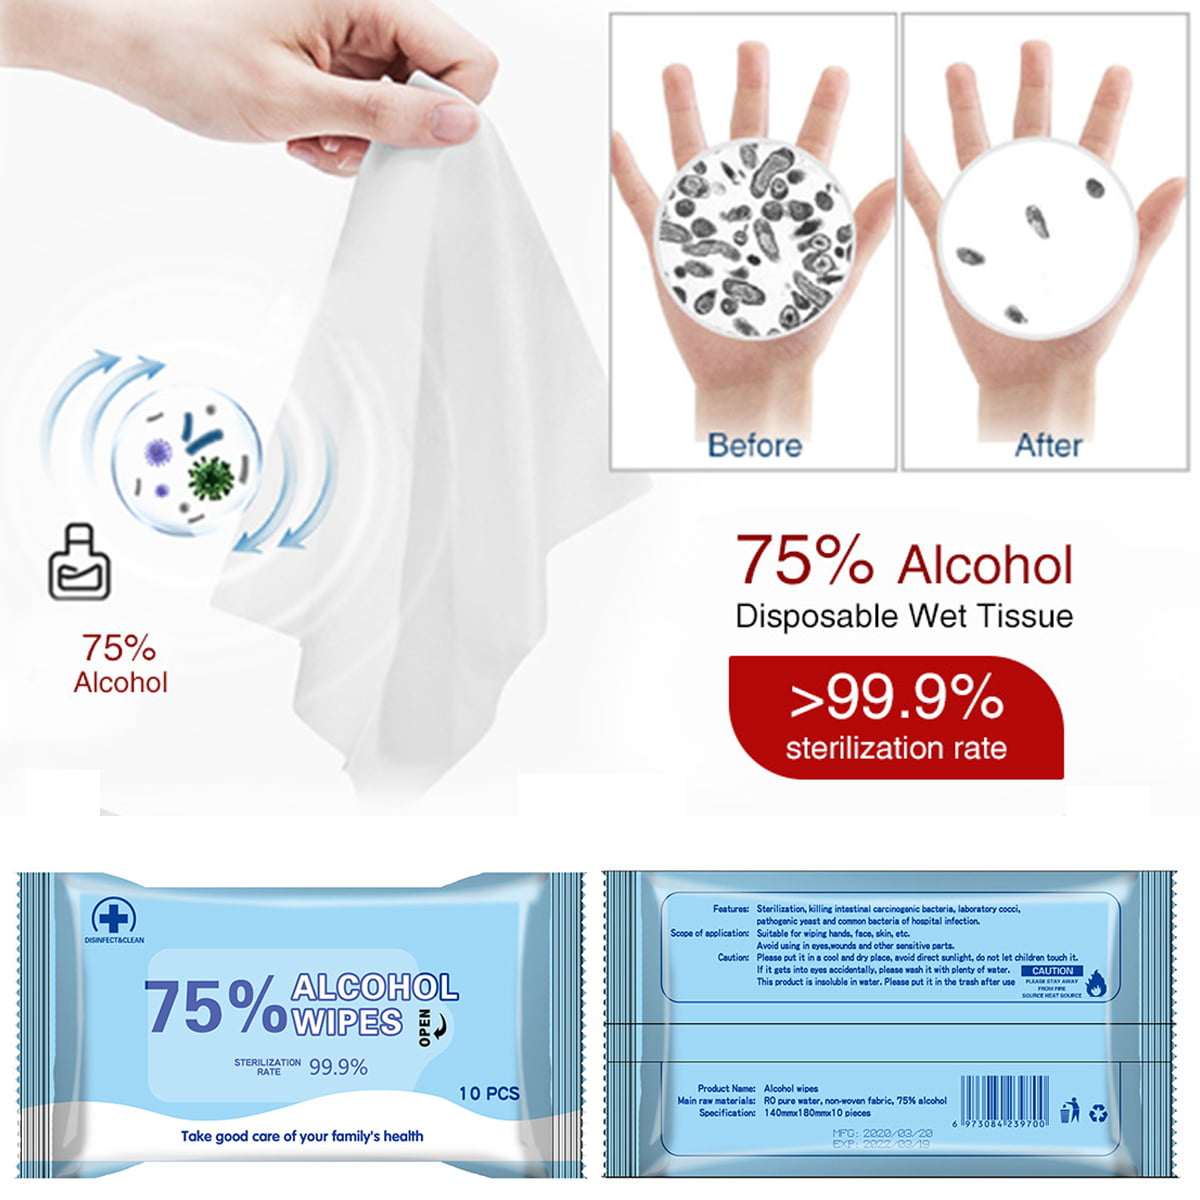 Cleaning Wipes,Disposable Wipes 80 Sheet Portable 75% Portable Hand Wipes Family Travel,Outdoor,Kitchen,Hand Skin Cleaning Care and Daily Use for Baby Kids Adult 